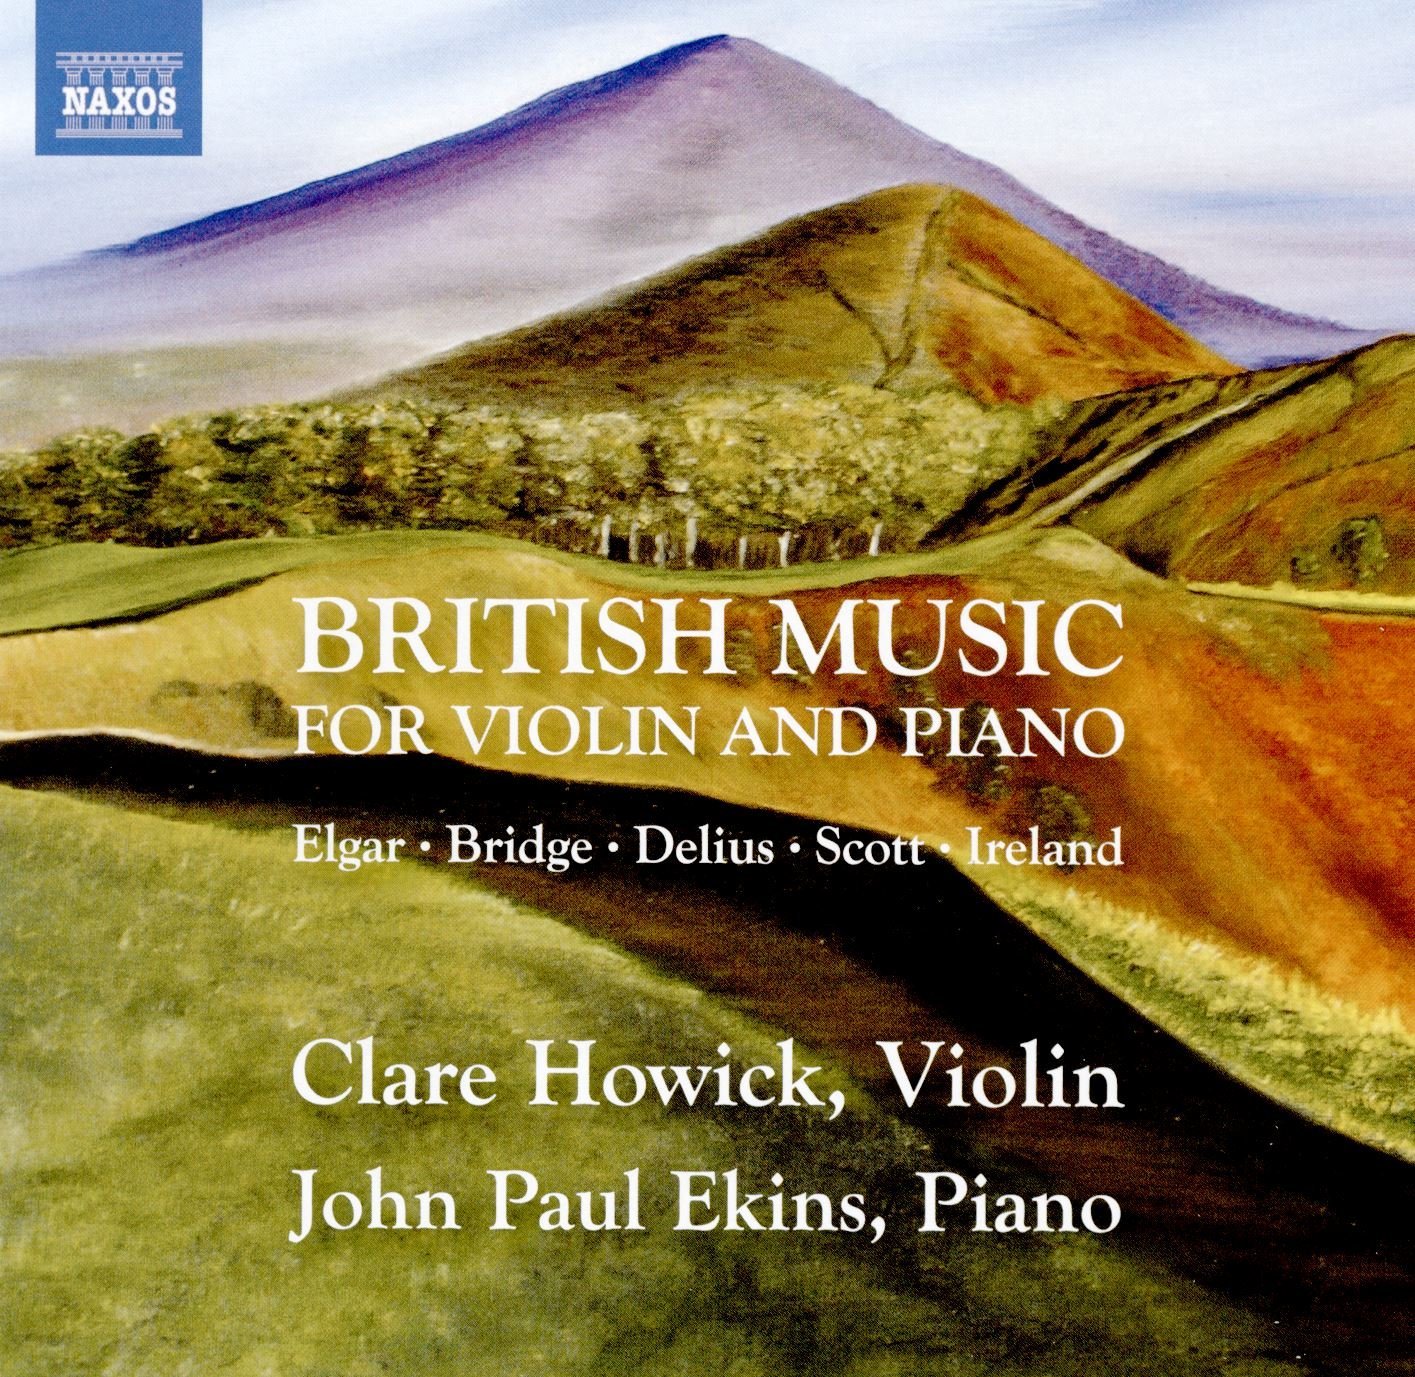 British Music for Violin and Piano: Clare Howick a